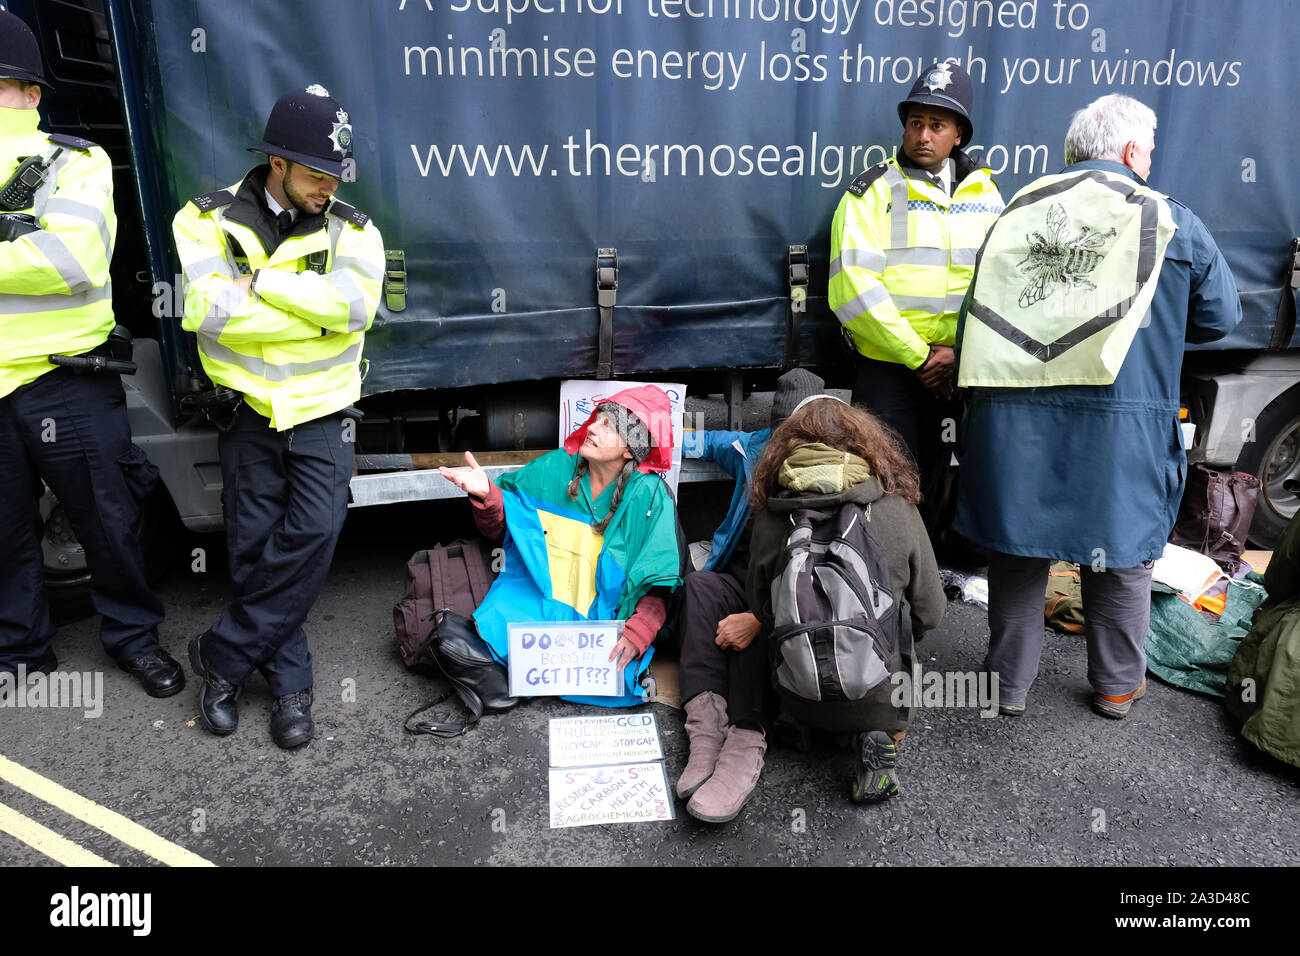 Westminster, London, UK - Monday 7th October 2019 - Several Extinction Rebellion XR climate protesters have locked themselves onto a lorry in Marsham Street just outside the Home Office - Police have surrounded the vehicle. Photo Steven May / Alamy Live News Stock Photo